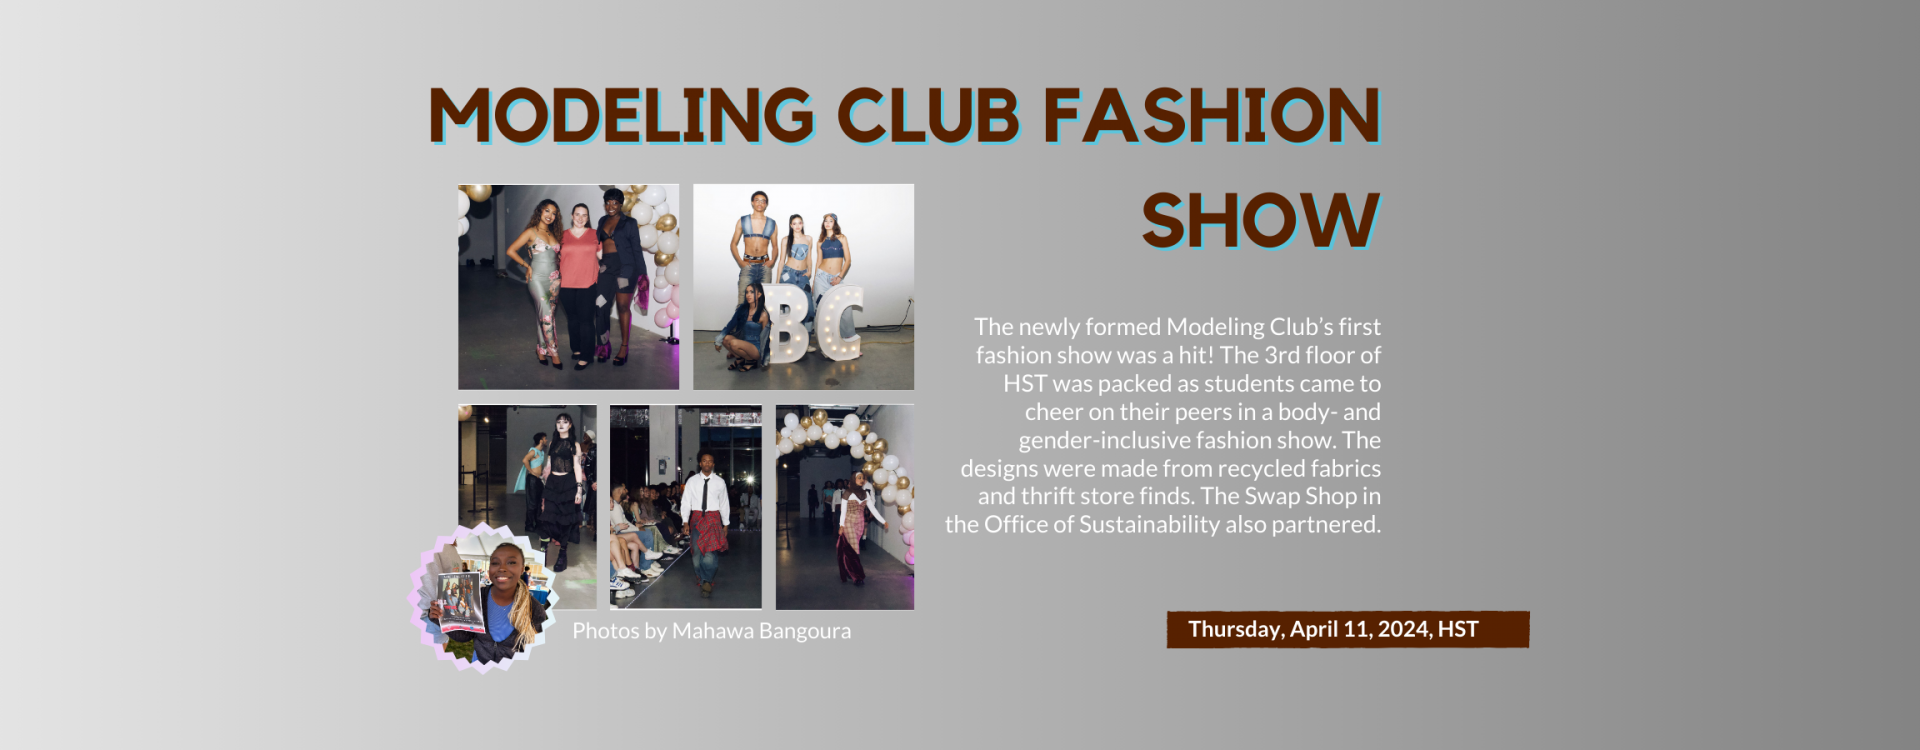 Modeling club fashion Show: The newly formed Modeling Club’s first fashion show was a hit! The 3rd floor of HST was packed as students came to cheer on their peers in a body- and gender-inclusive fashion show. The designs were made from recycled fabrics and thrift store finds. The Swap Shop in the Office of Sustainability also partnered.